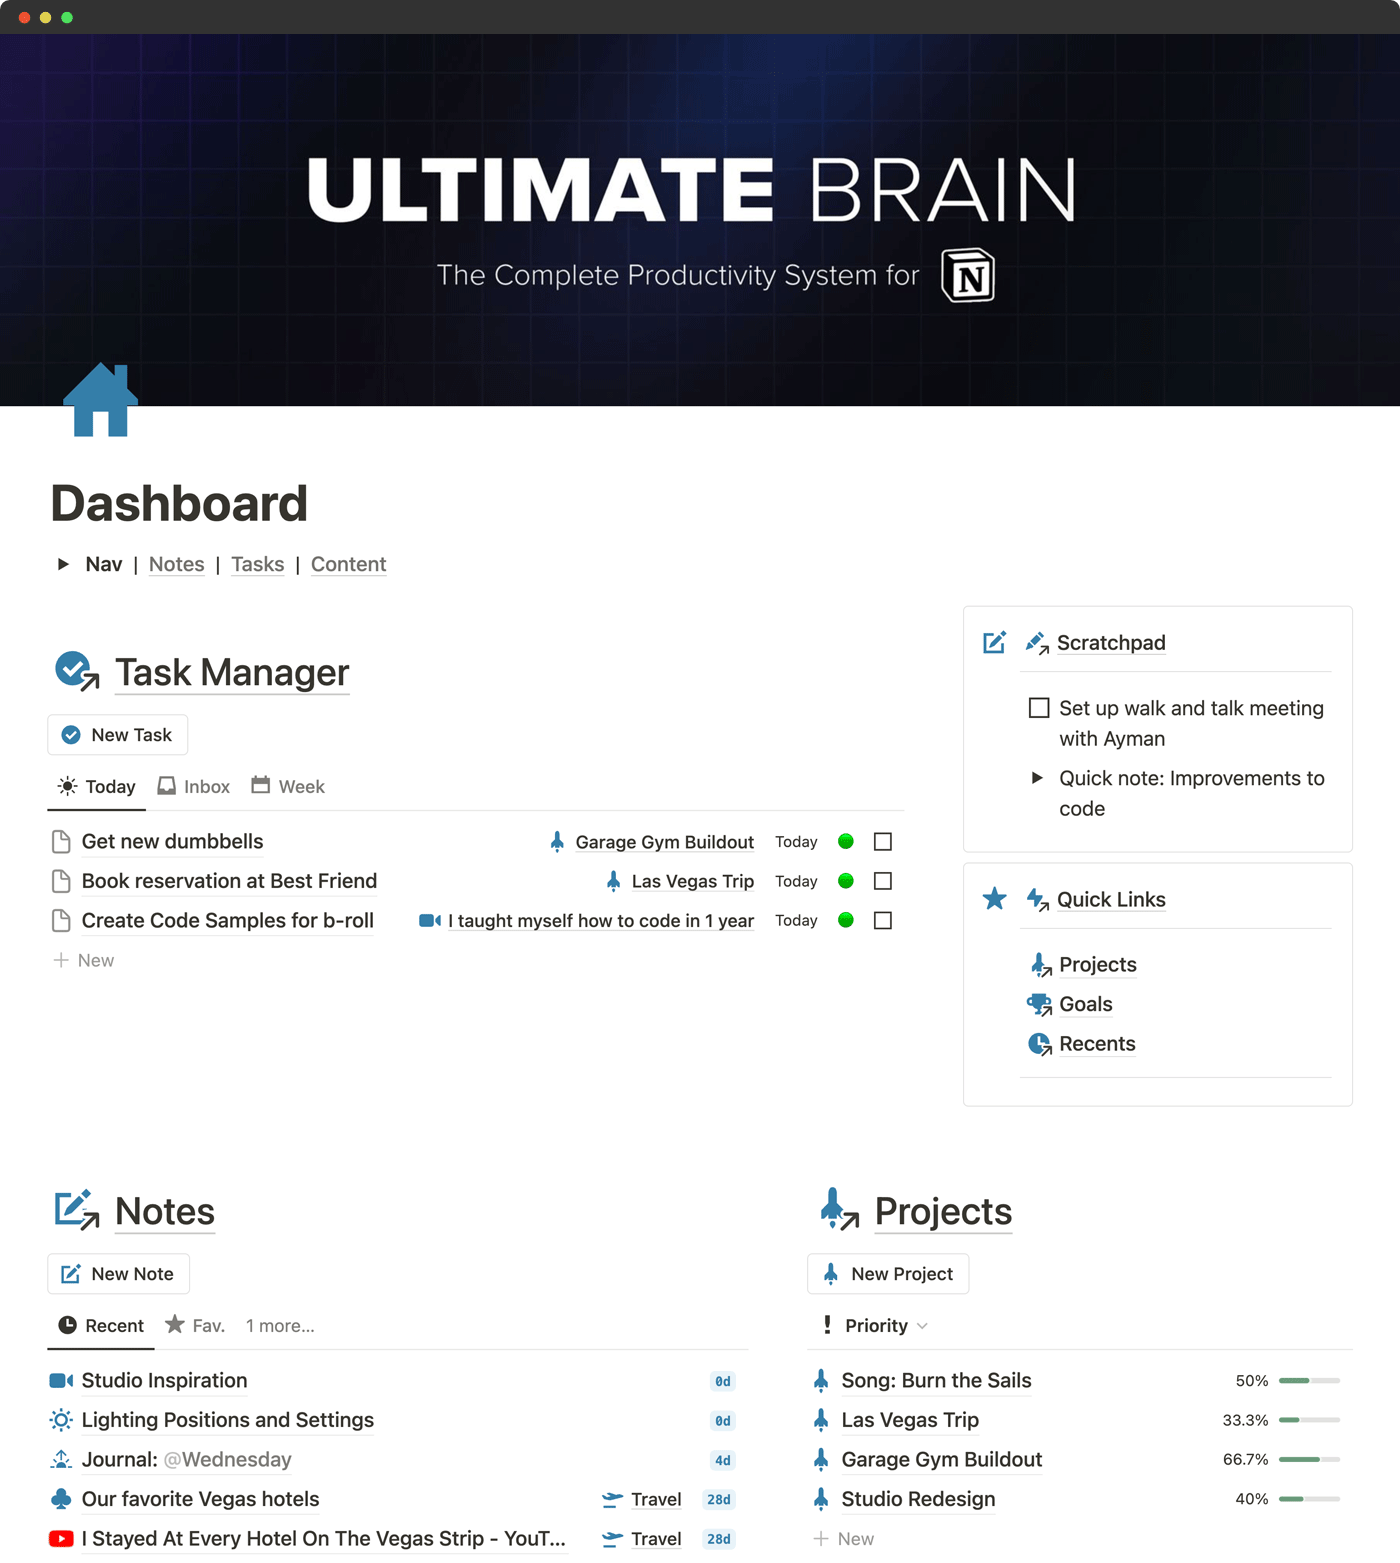 Screenshot of the Ultimate Brain dashboard page, featuring sections for tasks, notes, and projects